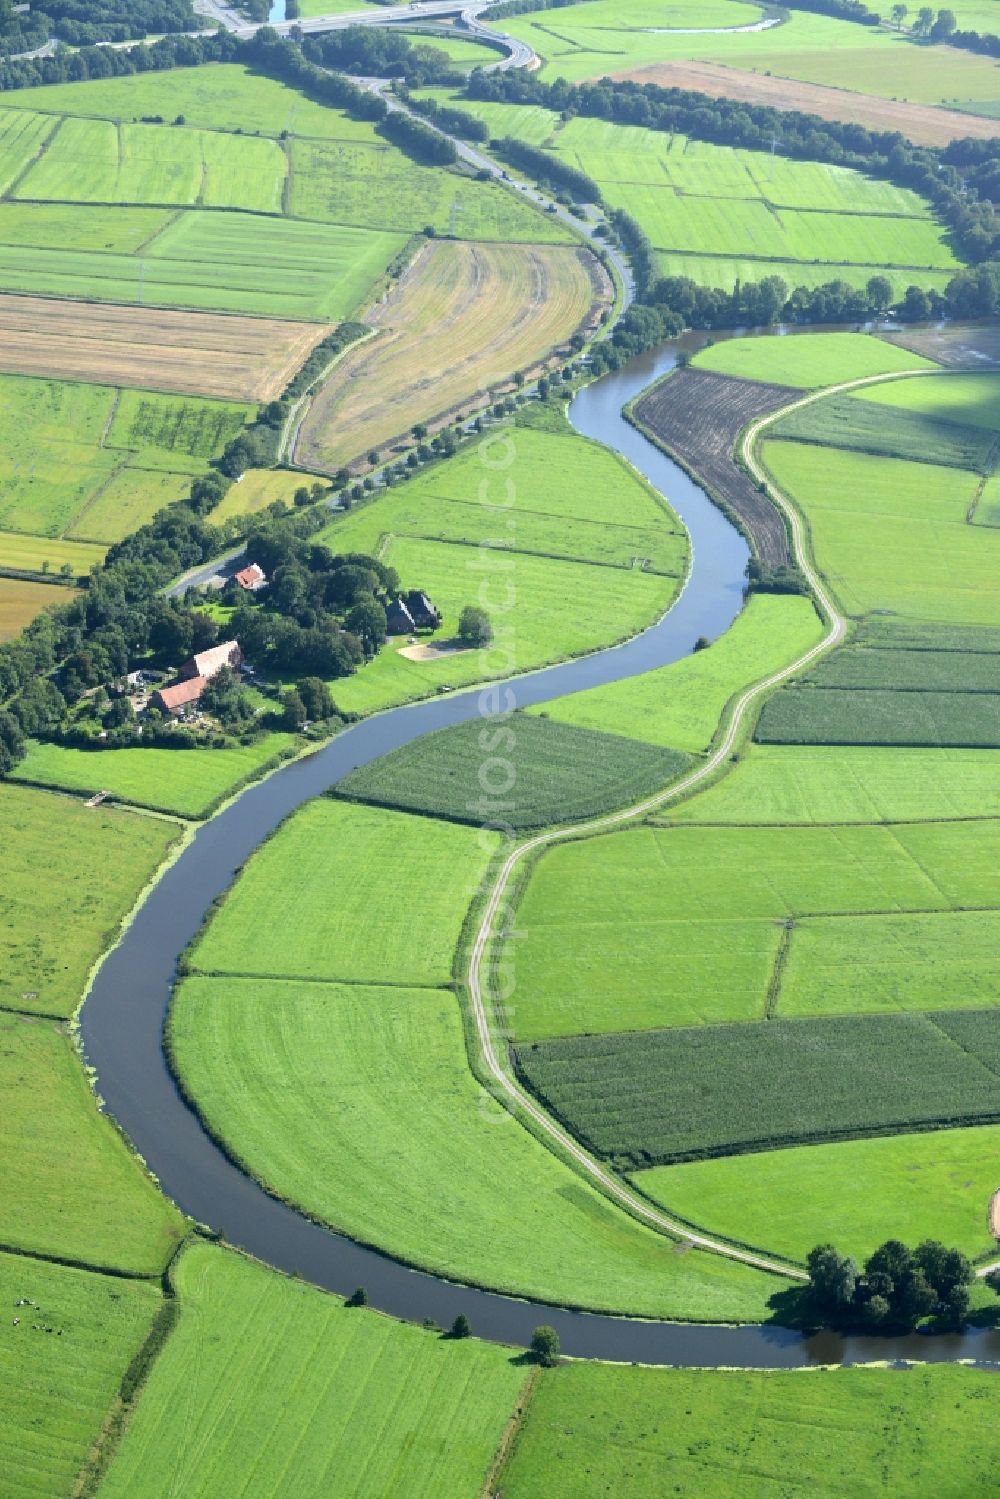 Loxstedt from above - Riparian zones on the course of the river Alte Lune in Loxstedt in the state Lower Saxony